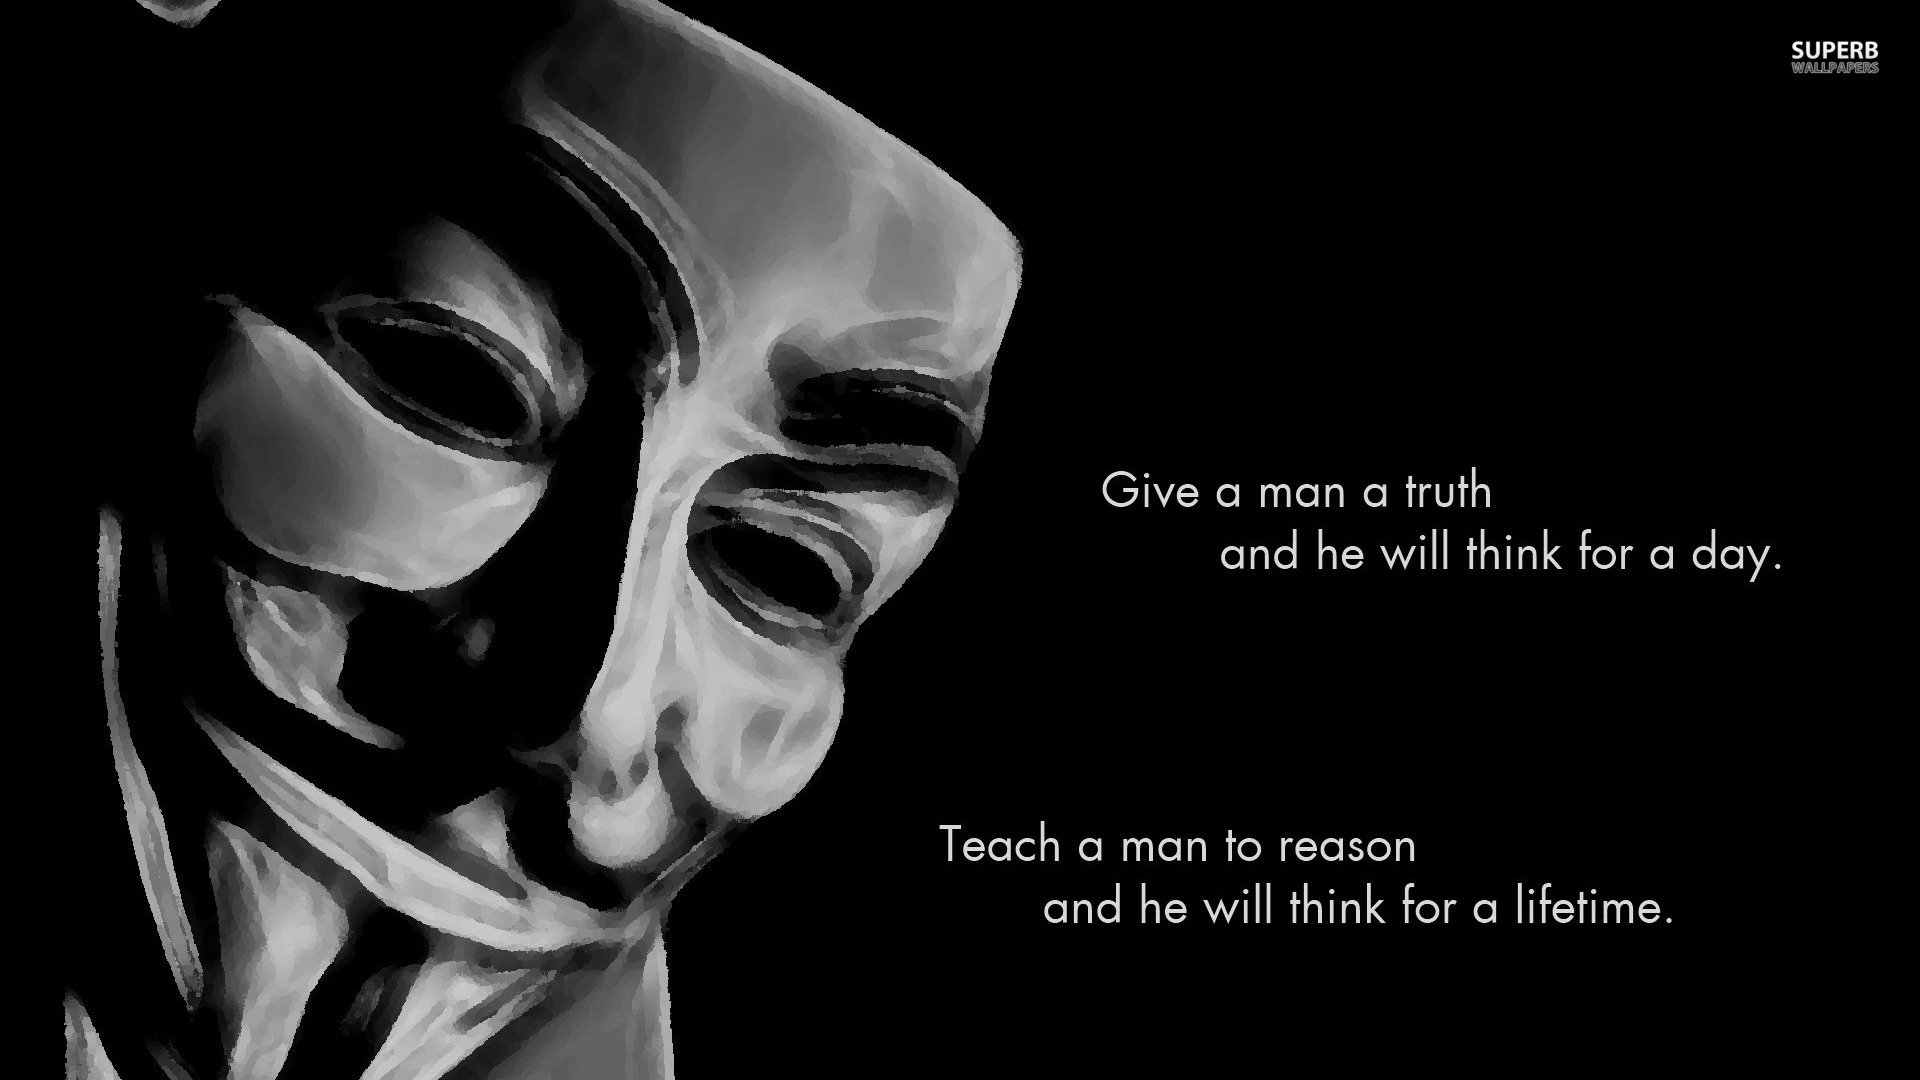 give-a-man-a-truth-14916-1920x1080